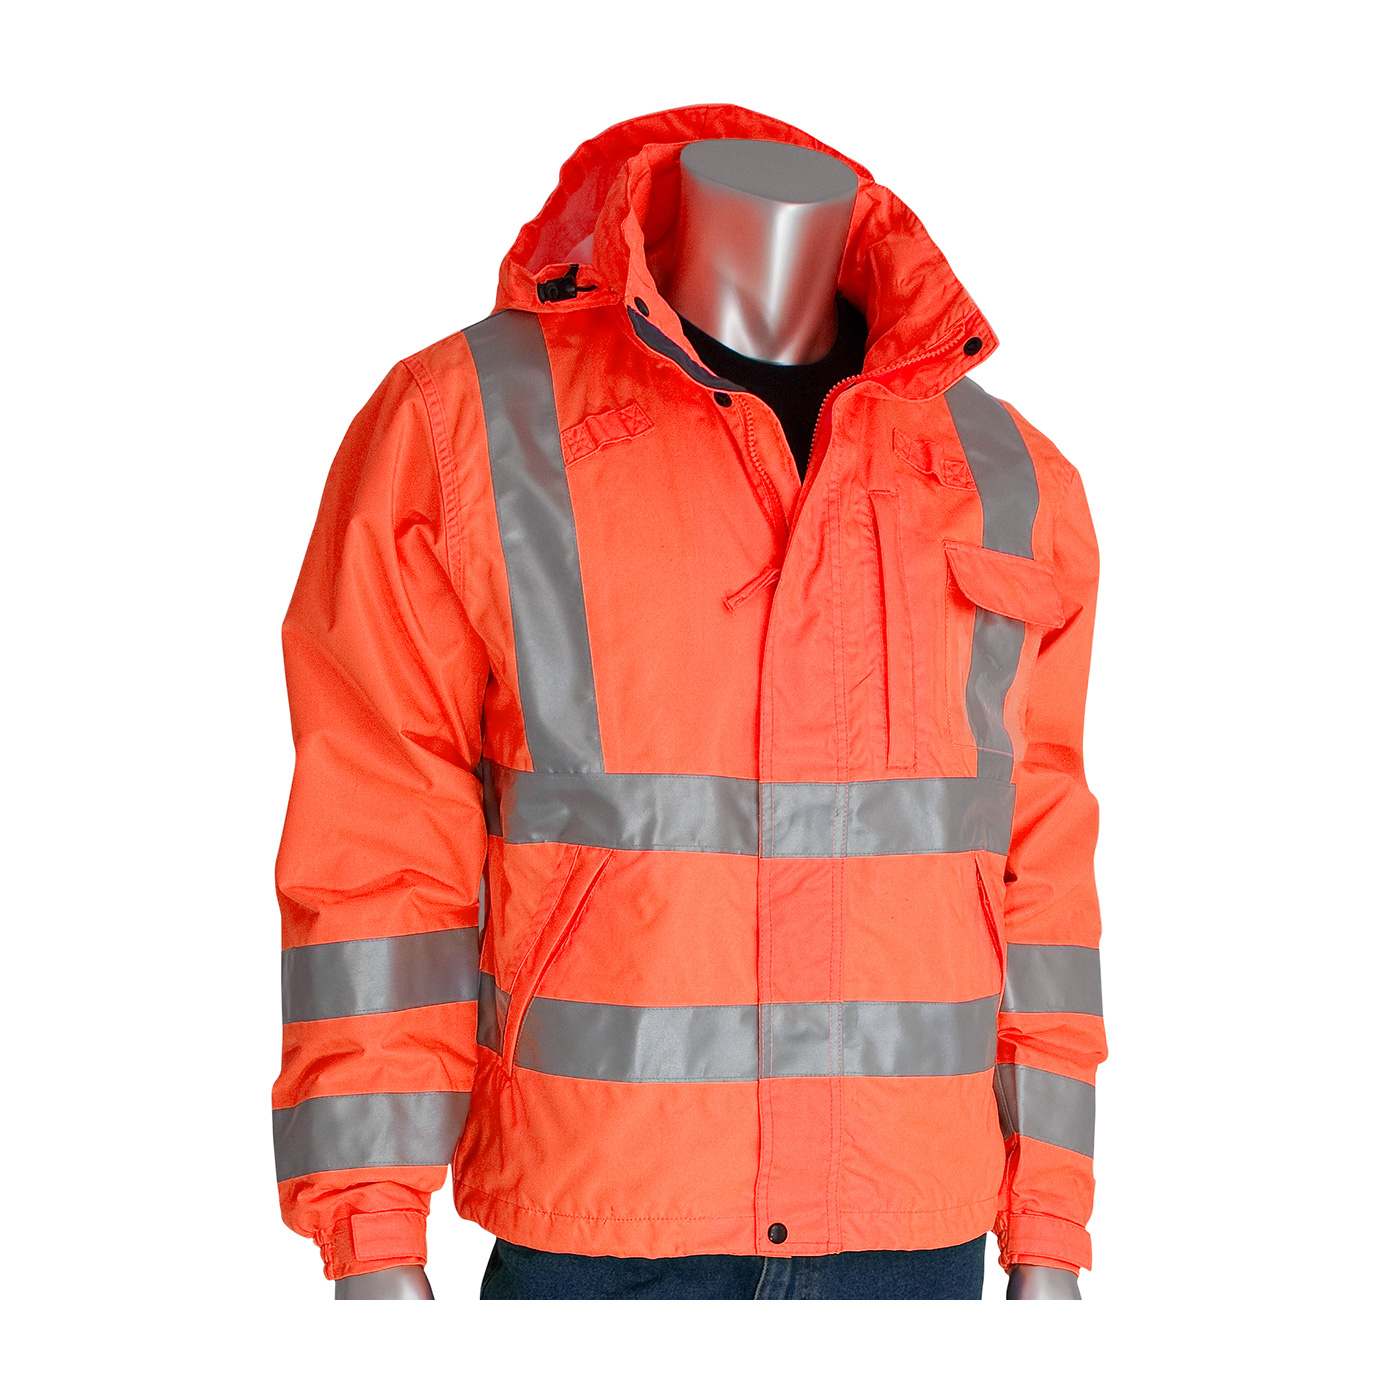 PIP VizPLUS Type R Class 3 Heavy Duty Waterproof Breathable Jacket from Columbia Safety